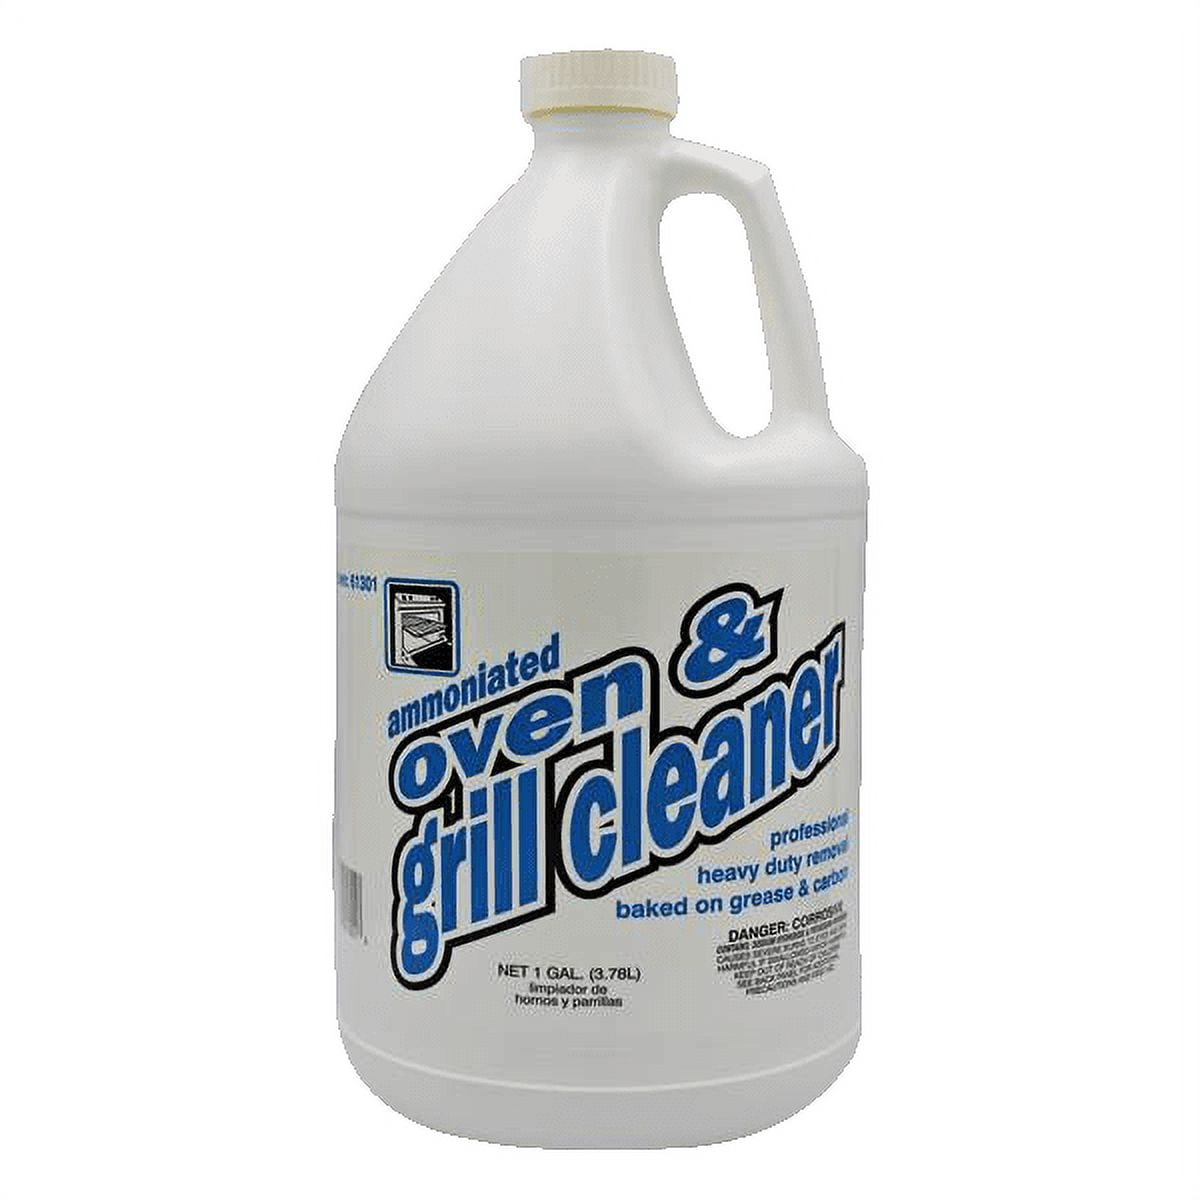 ChemCor Oven & Grill Cleaner Decarbonizer 1 Gallon Liquid, Size: One Size